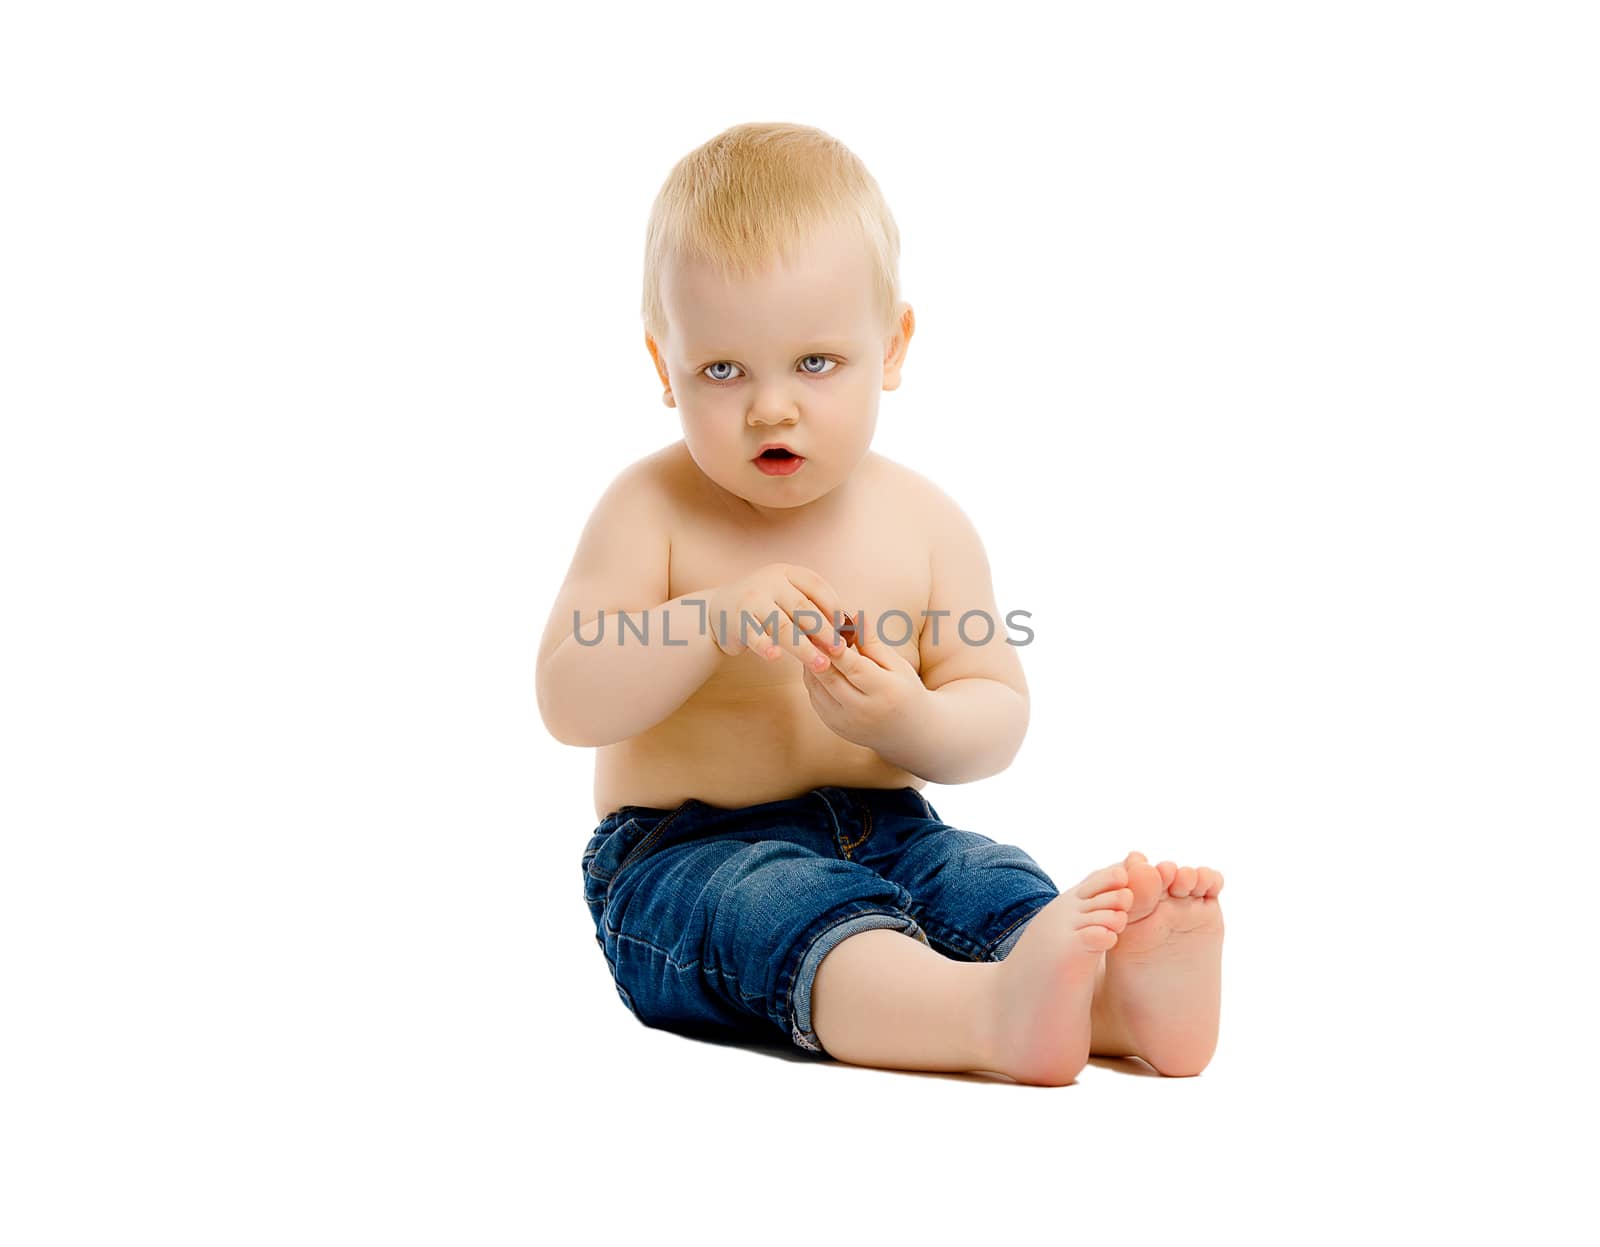 A little boy in a jeans on white background